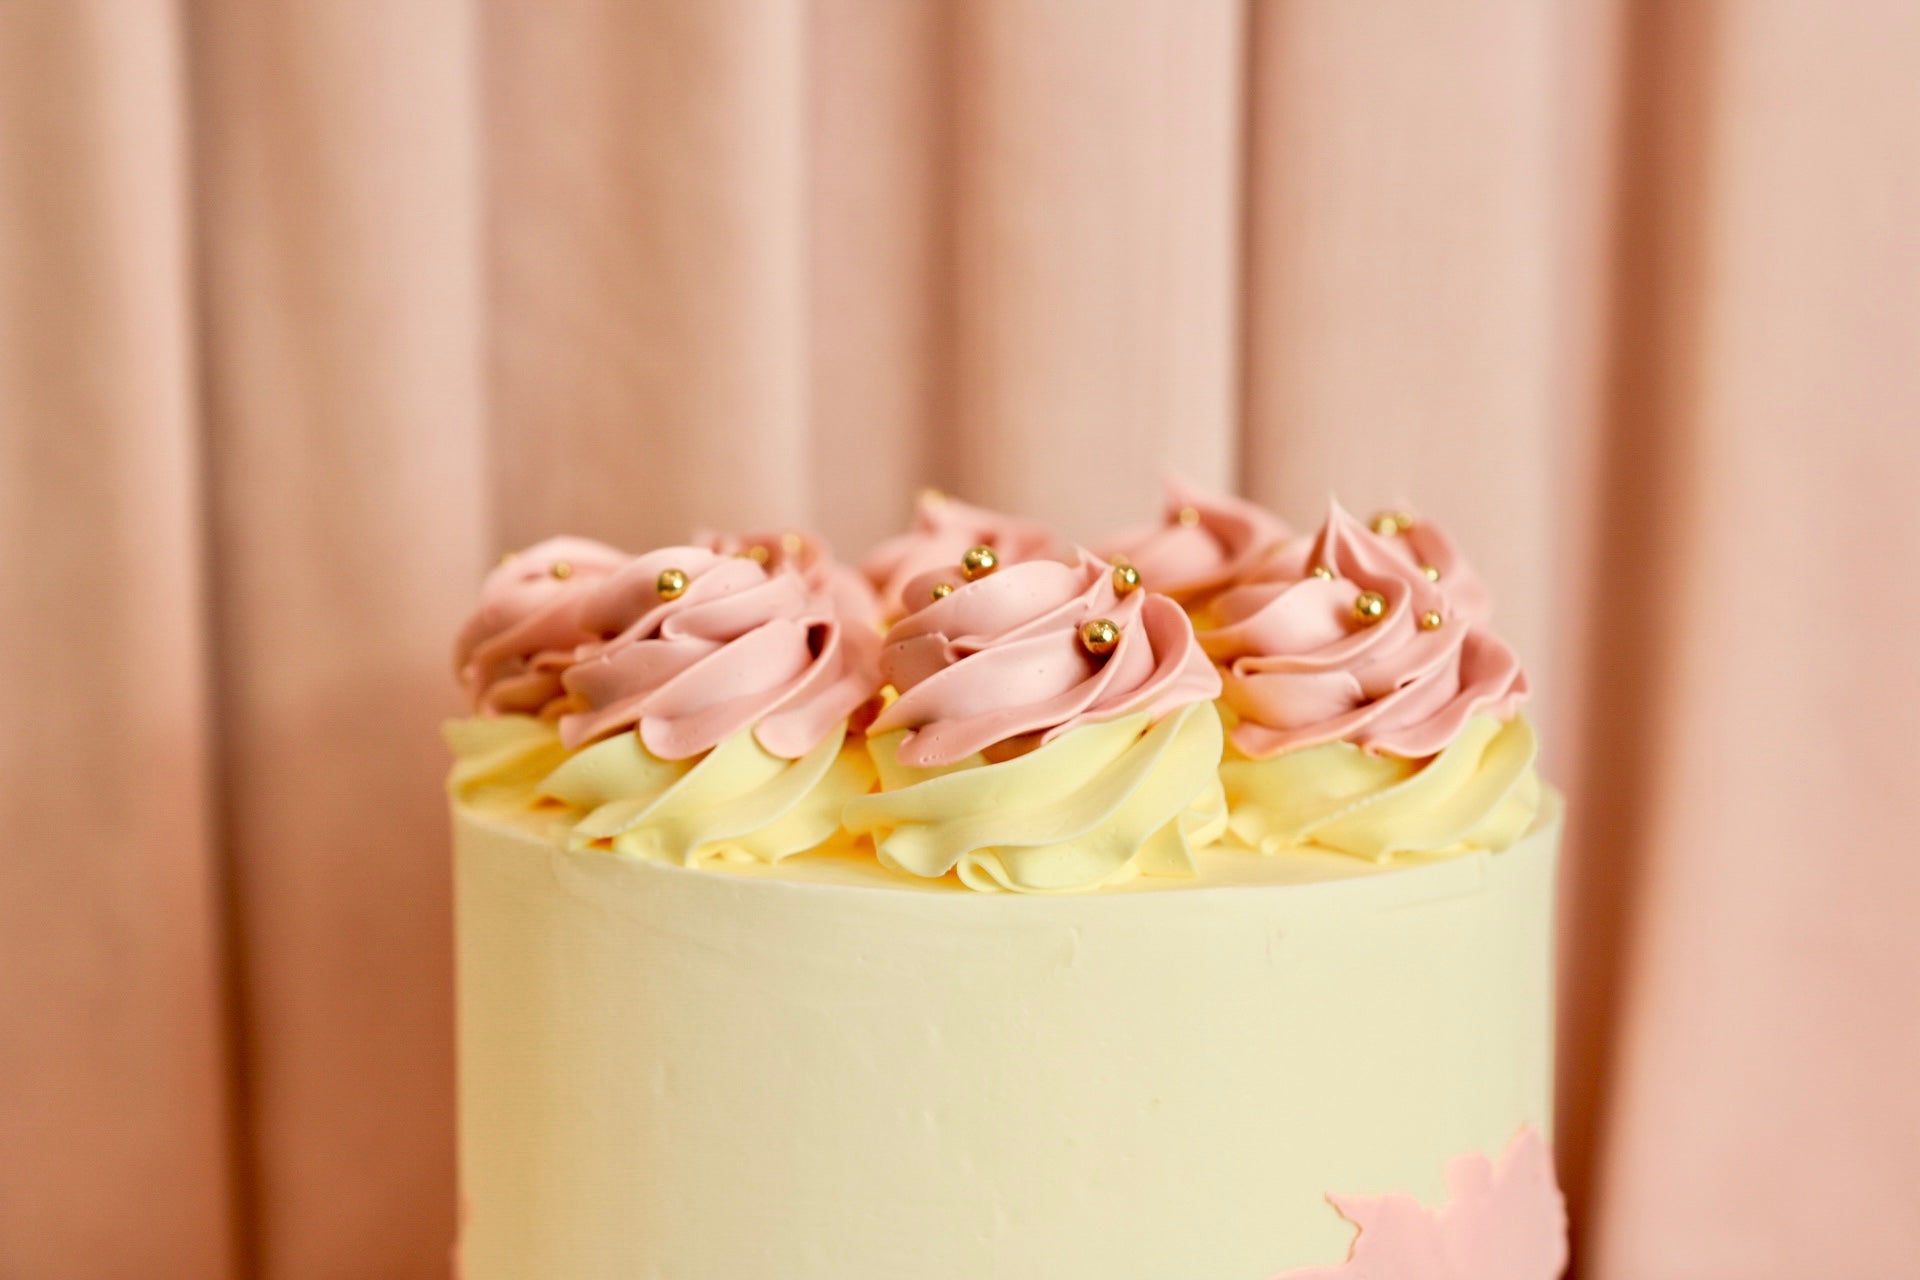 The pastel cake, created with layers of white, pink, and yellow to resemble the signature colors of our store Cafe Pastel.